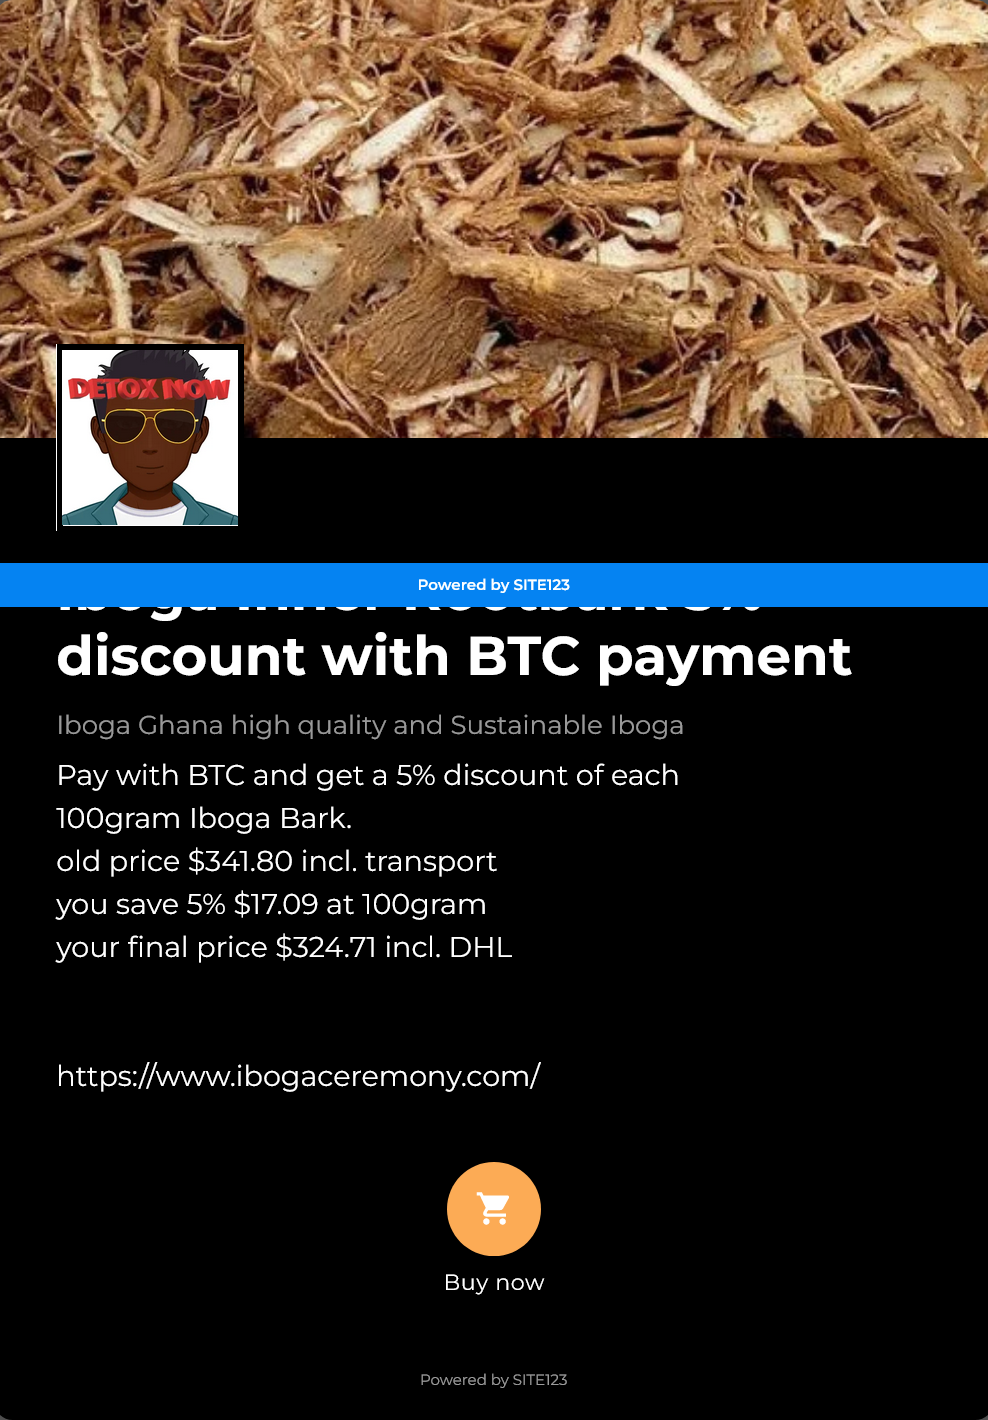 Iboga Inner Rootbark 5% discount with BTC payment